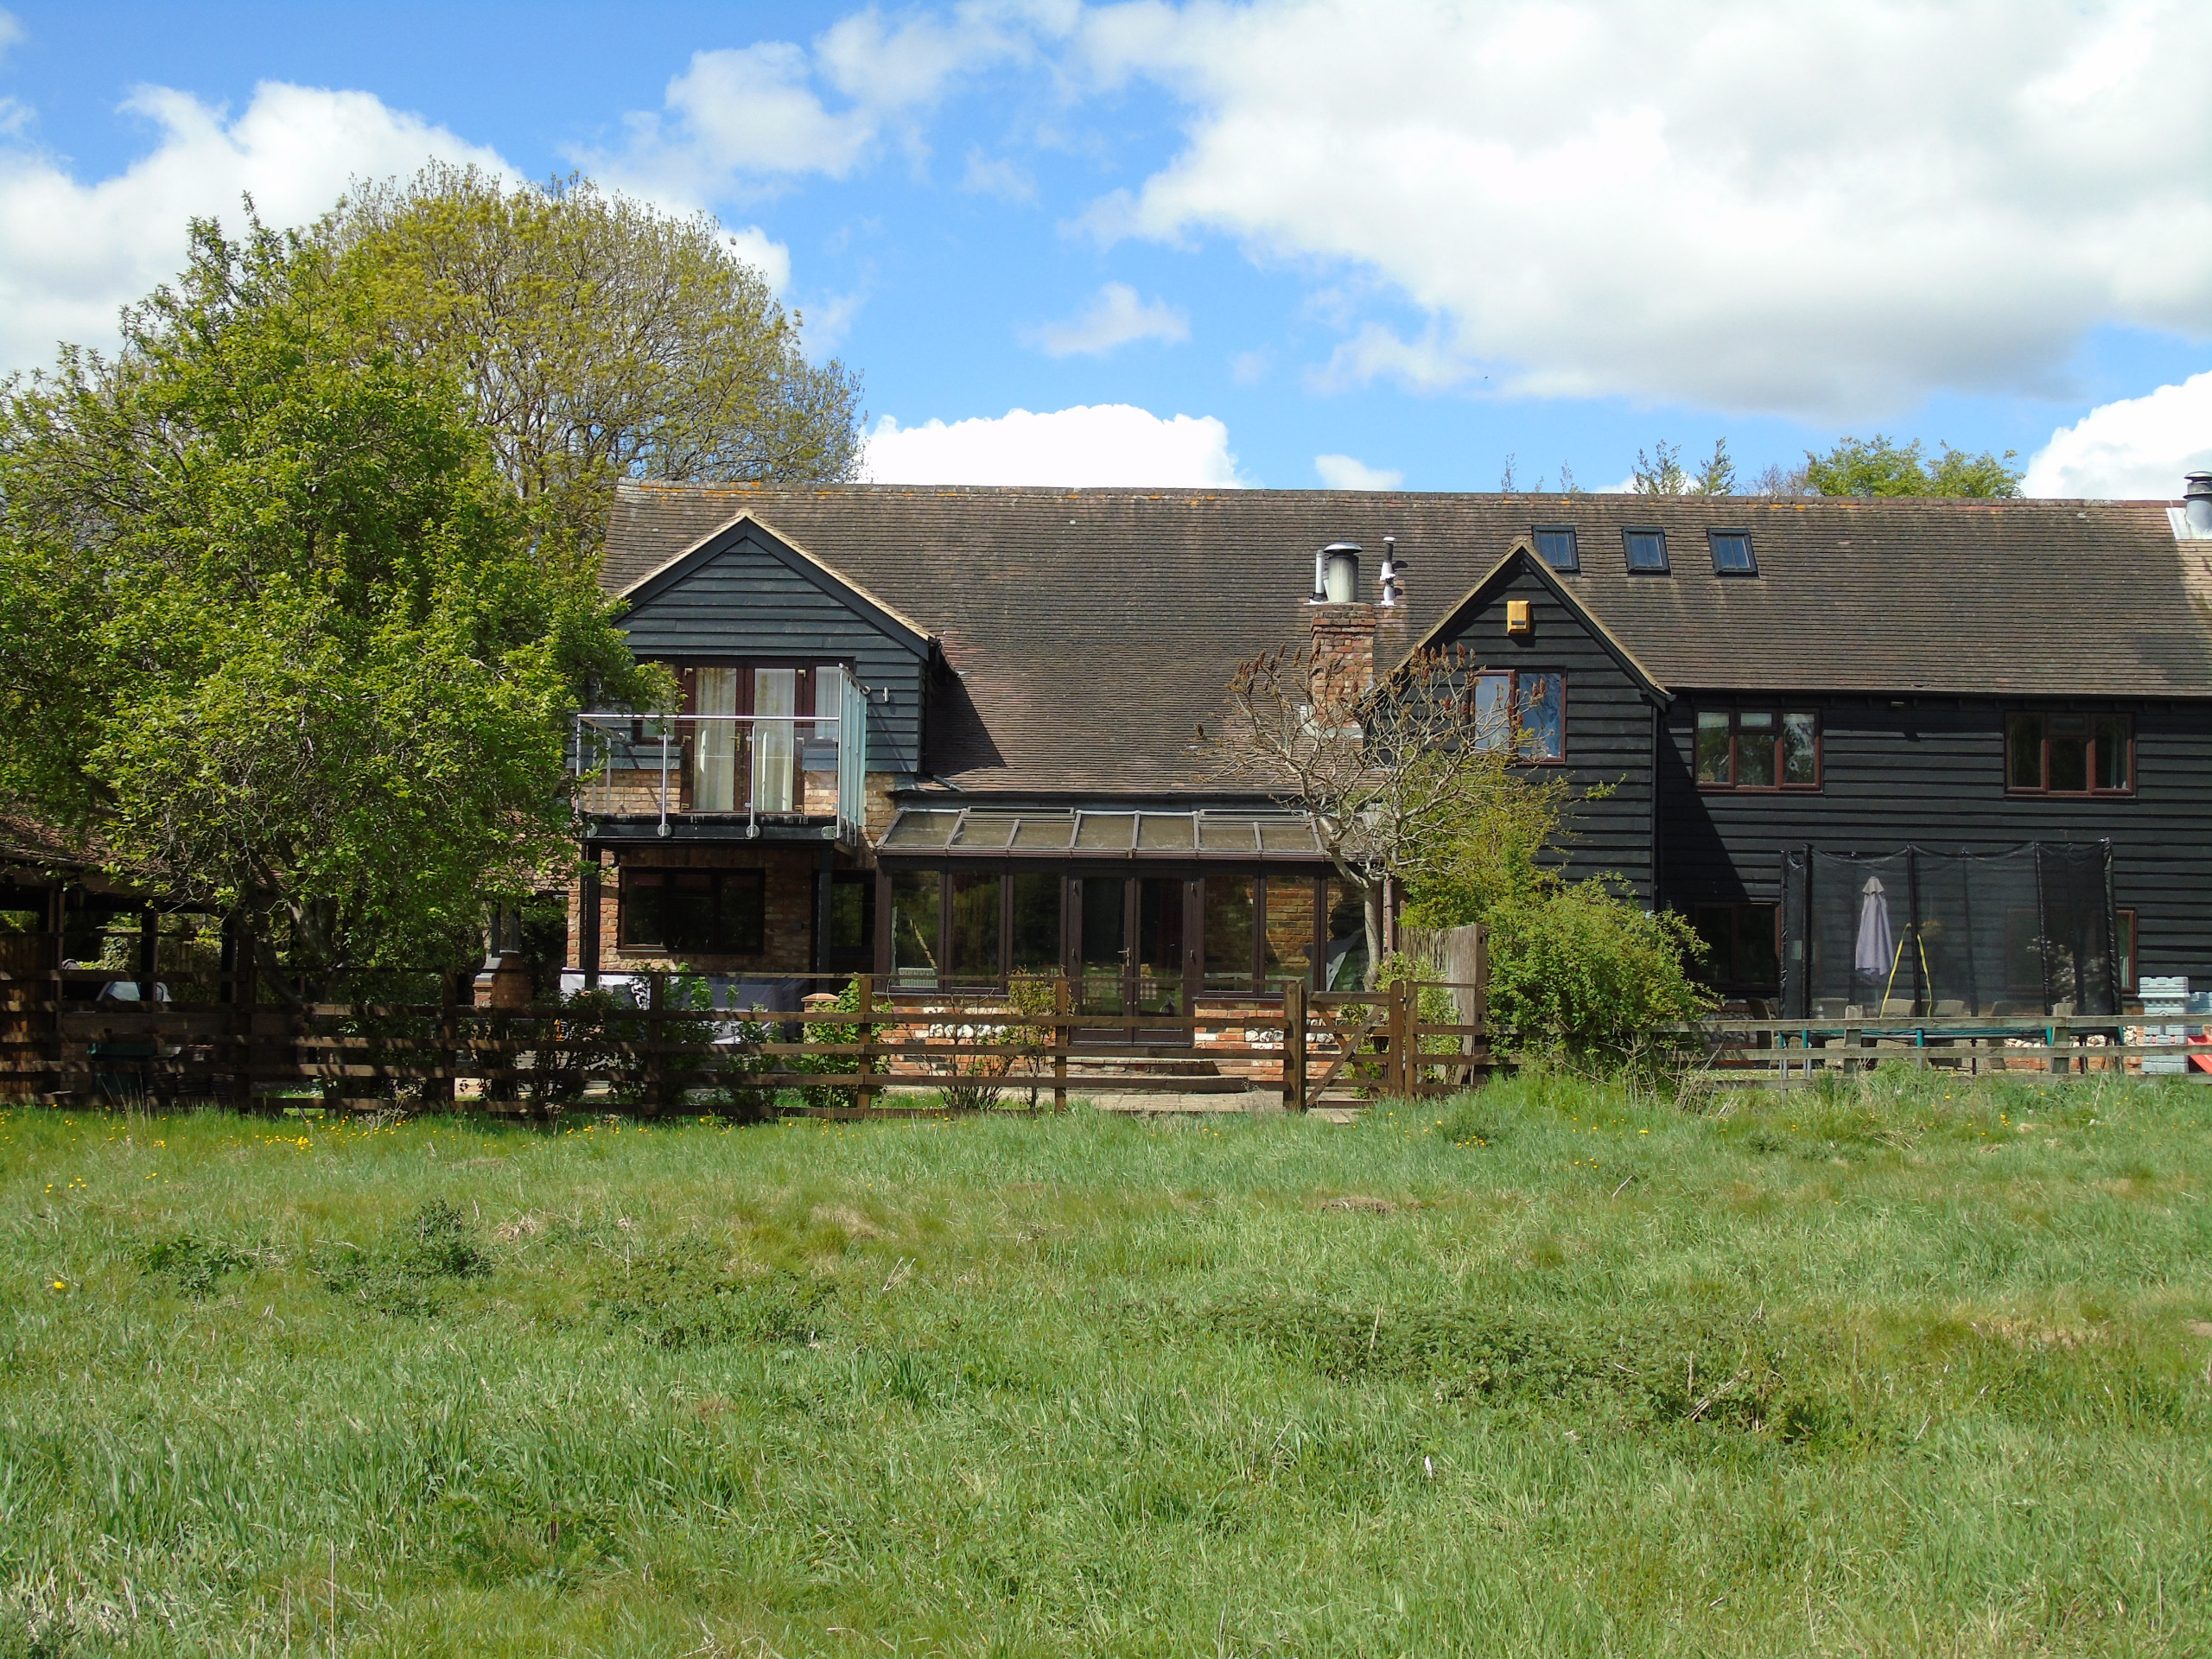 Rear view of completed barn conversion with balcony